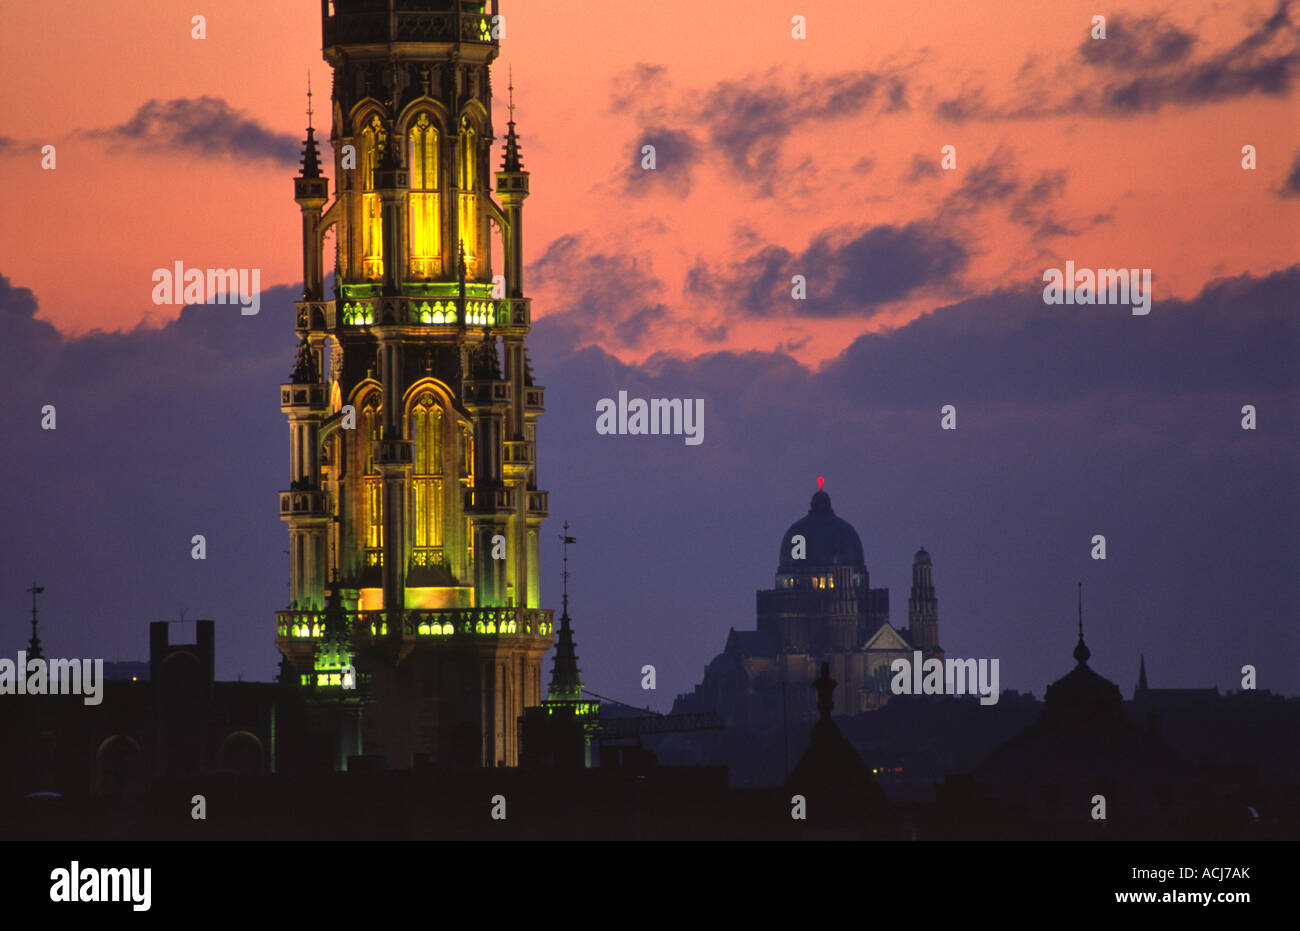 The ornate tower of Brussels Town Hall dominates the city skyline at dusk. Brussels, Belgium. Stock Photo